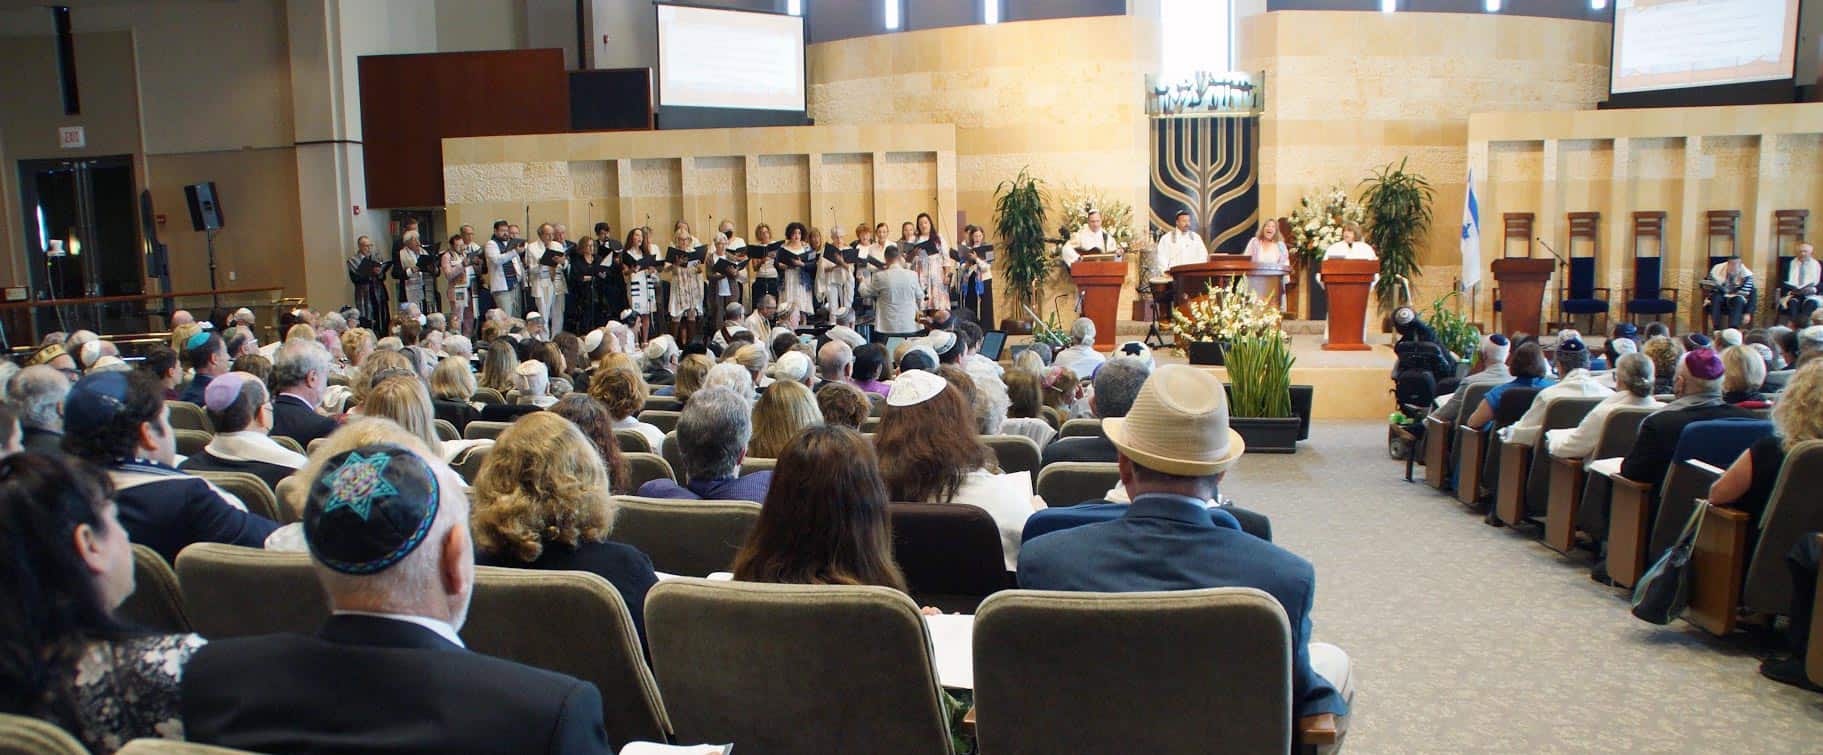 People seated in a synagogue during a High Holy Day service